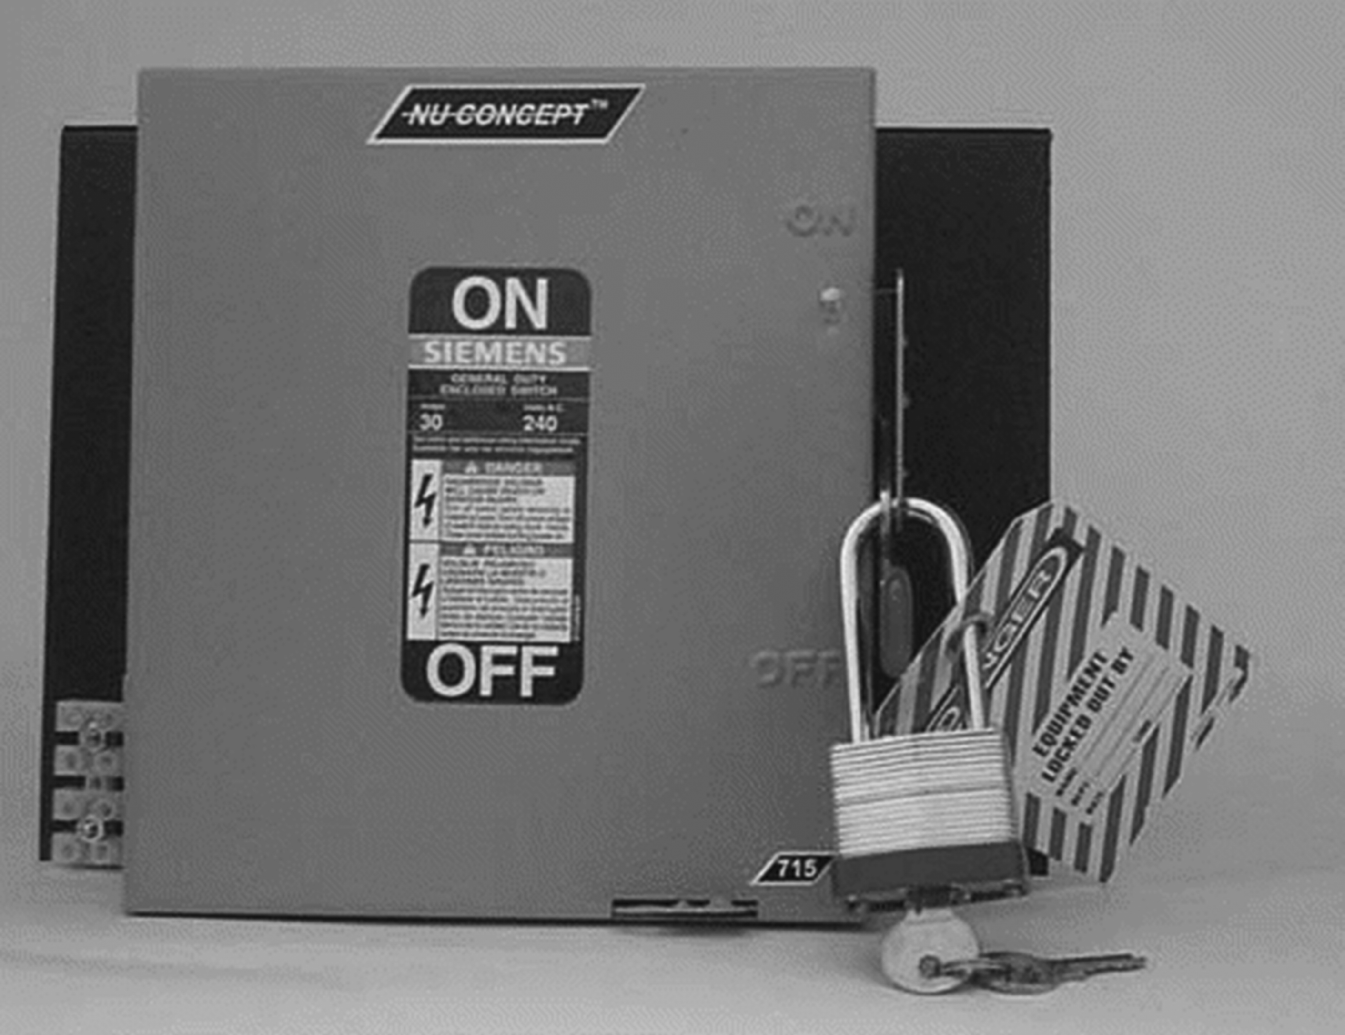 Image of LTO disconnect lockout (Courtesy of Lockout Tagout Safety).